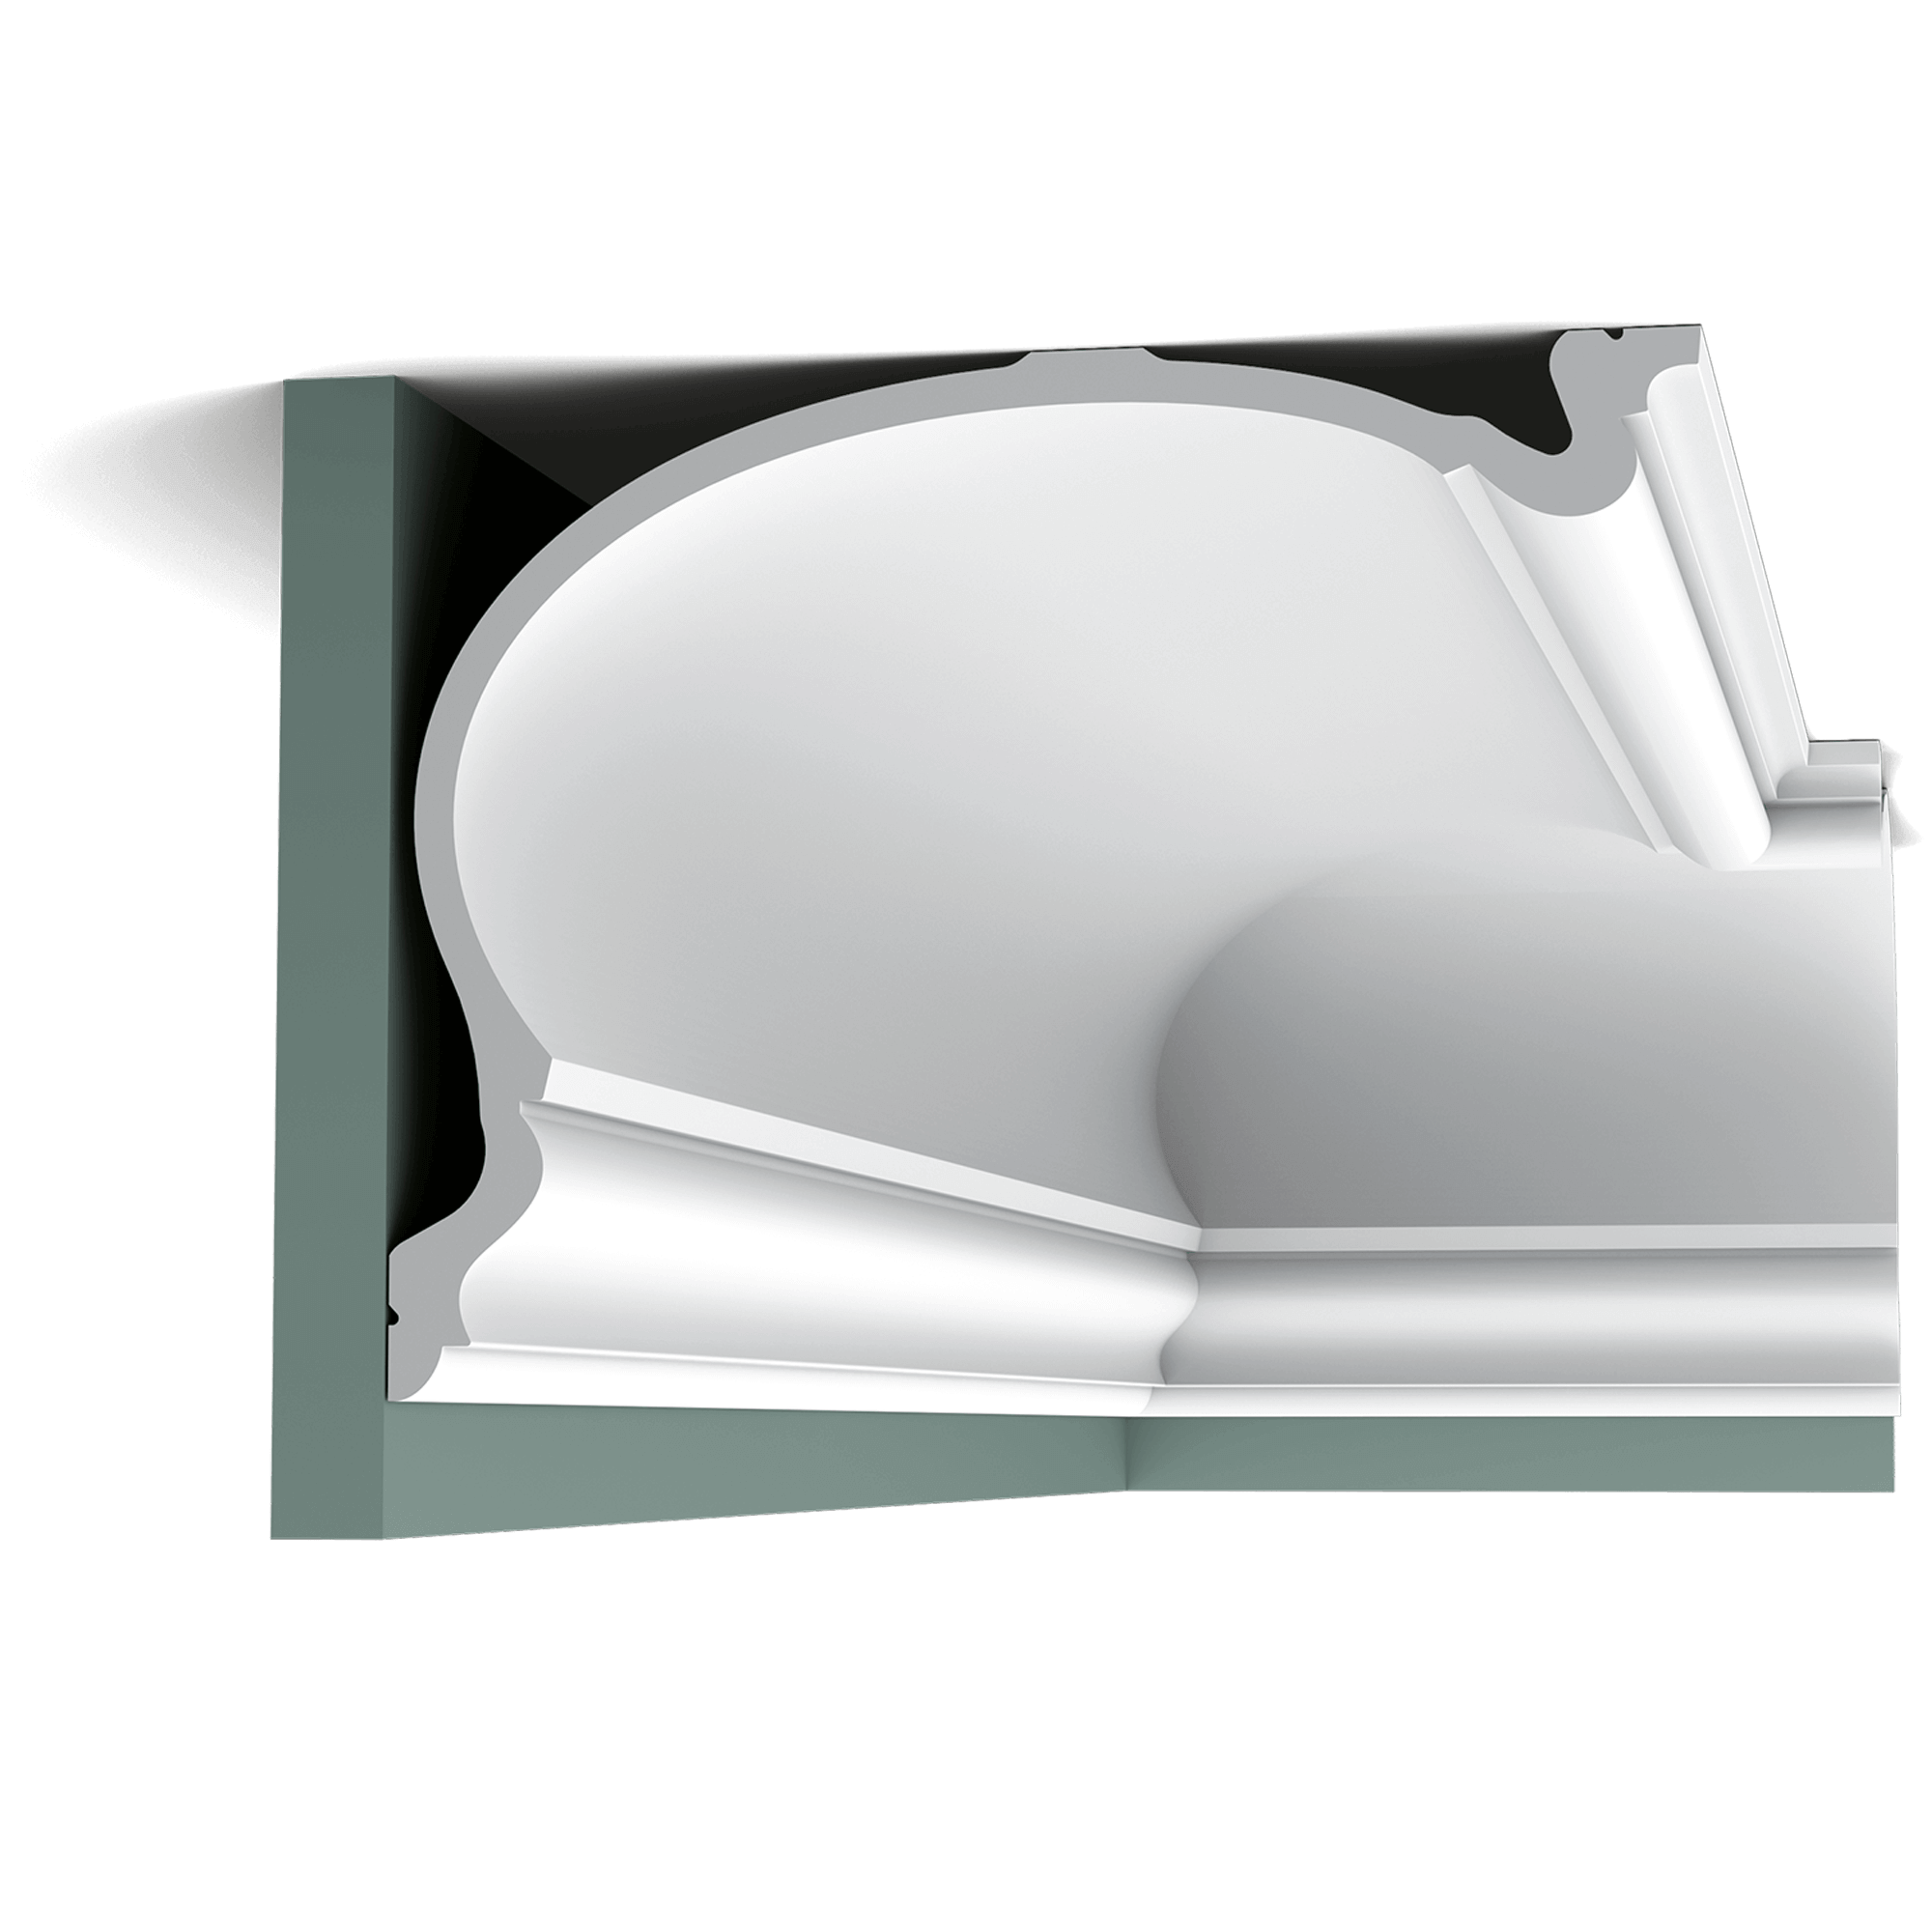 c344 cornice moulding fb40 The largest member of the HERITAGE family. A stately classic cornice moulding inspired by the rich heritage of English country homes. Installation remark: It is necessary to screw this profile on the wall.